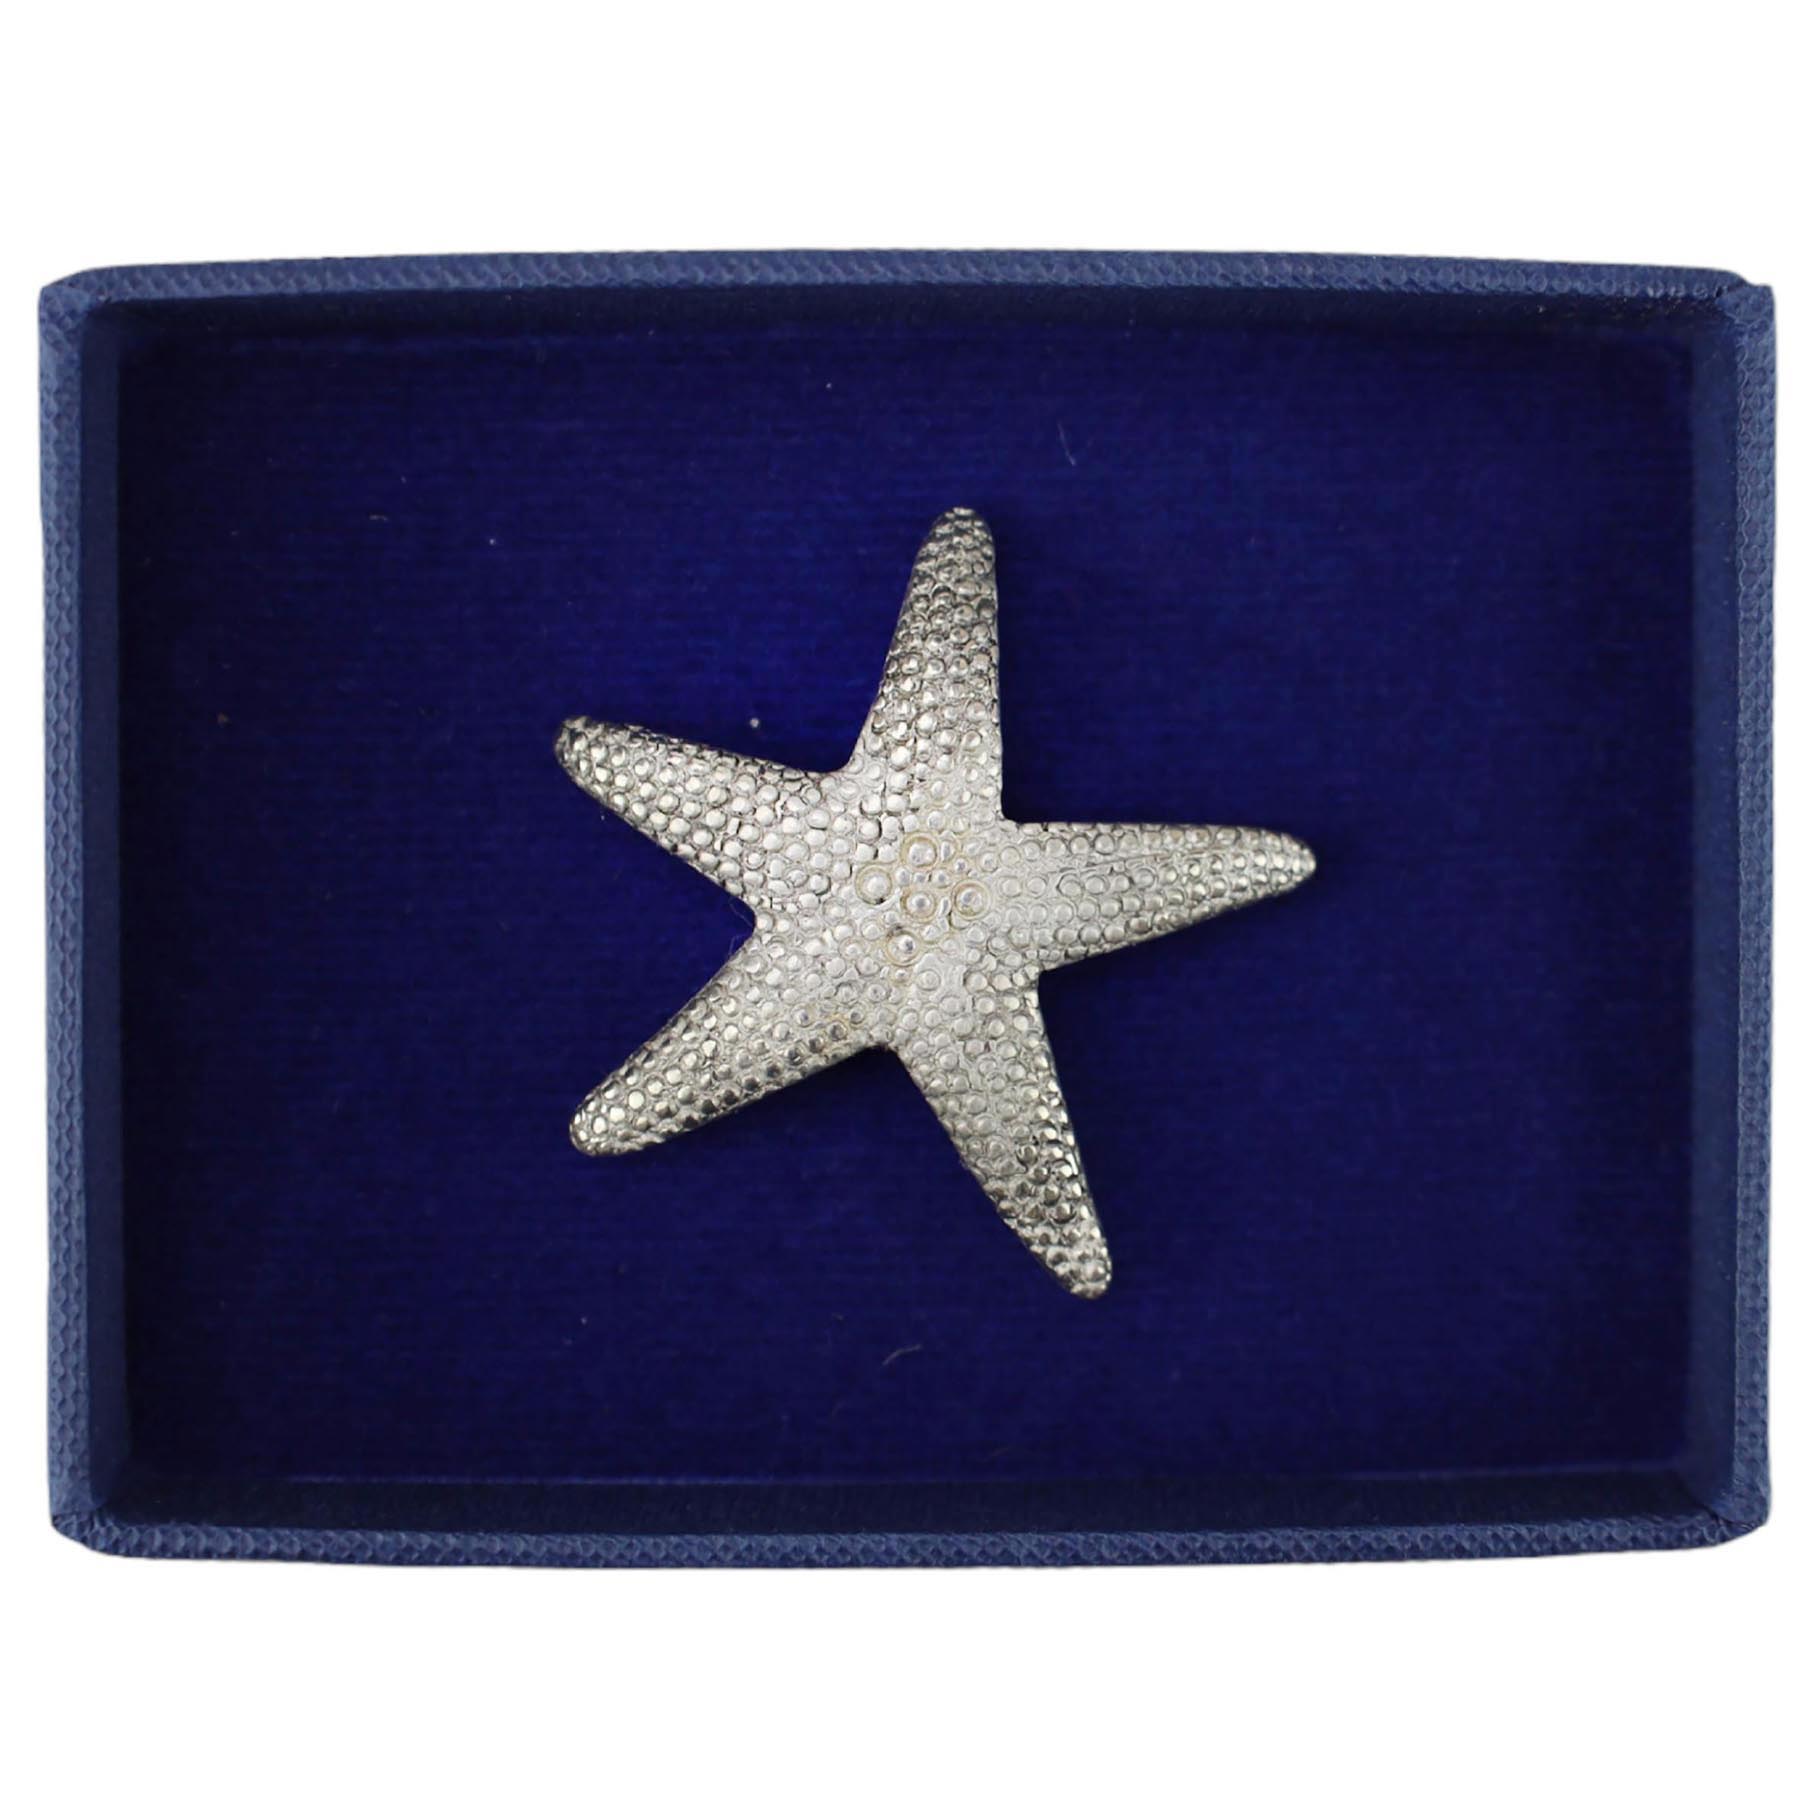 Pewter Starfish Candle Pin shown in the Navy box that it comes in